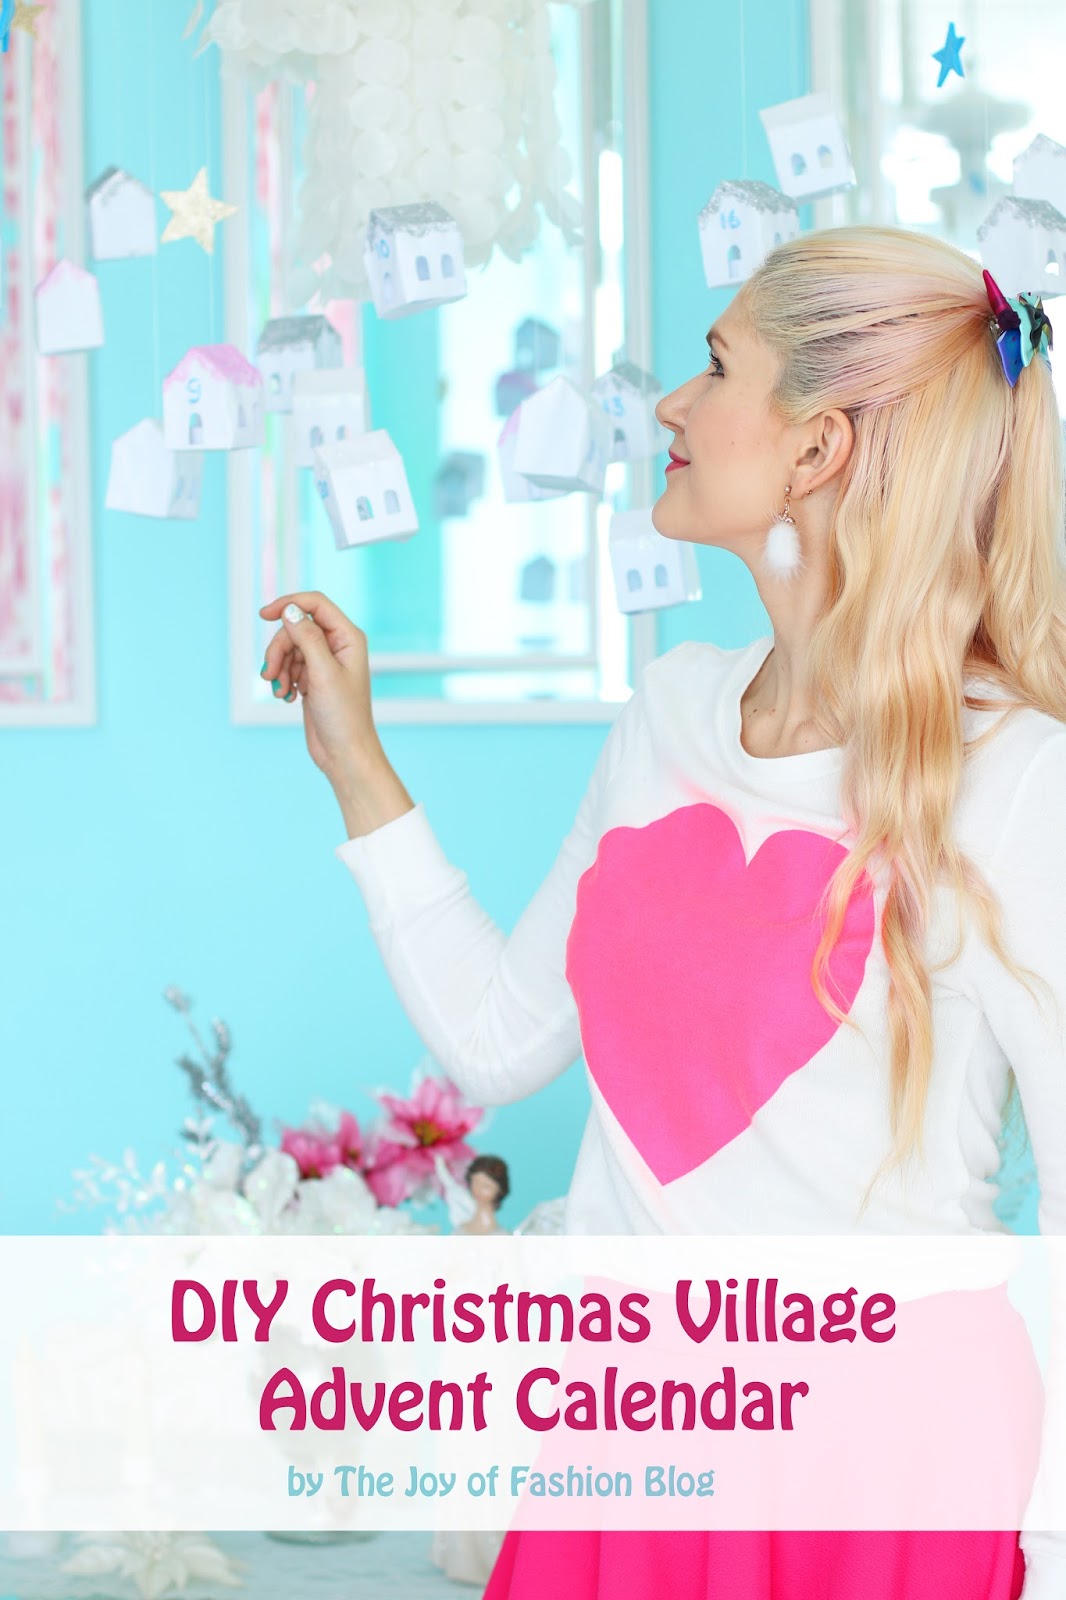 Use paper and glitter to create this cute DIY Advent Calendar made to look like a Christmas Village. Click through for full tutorial